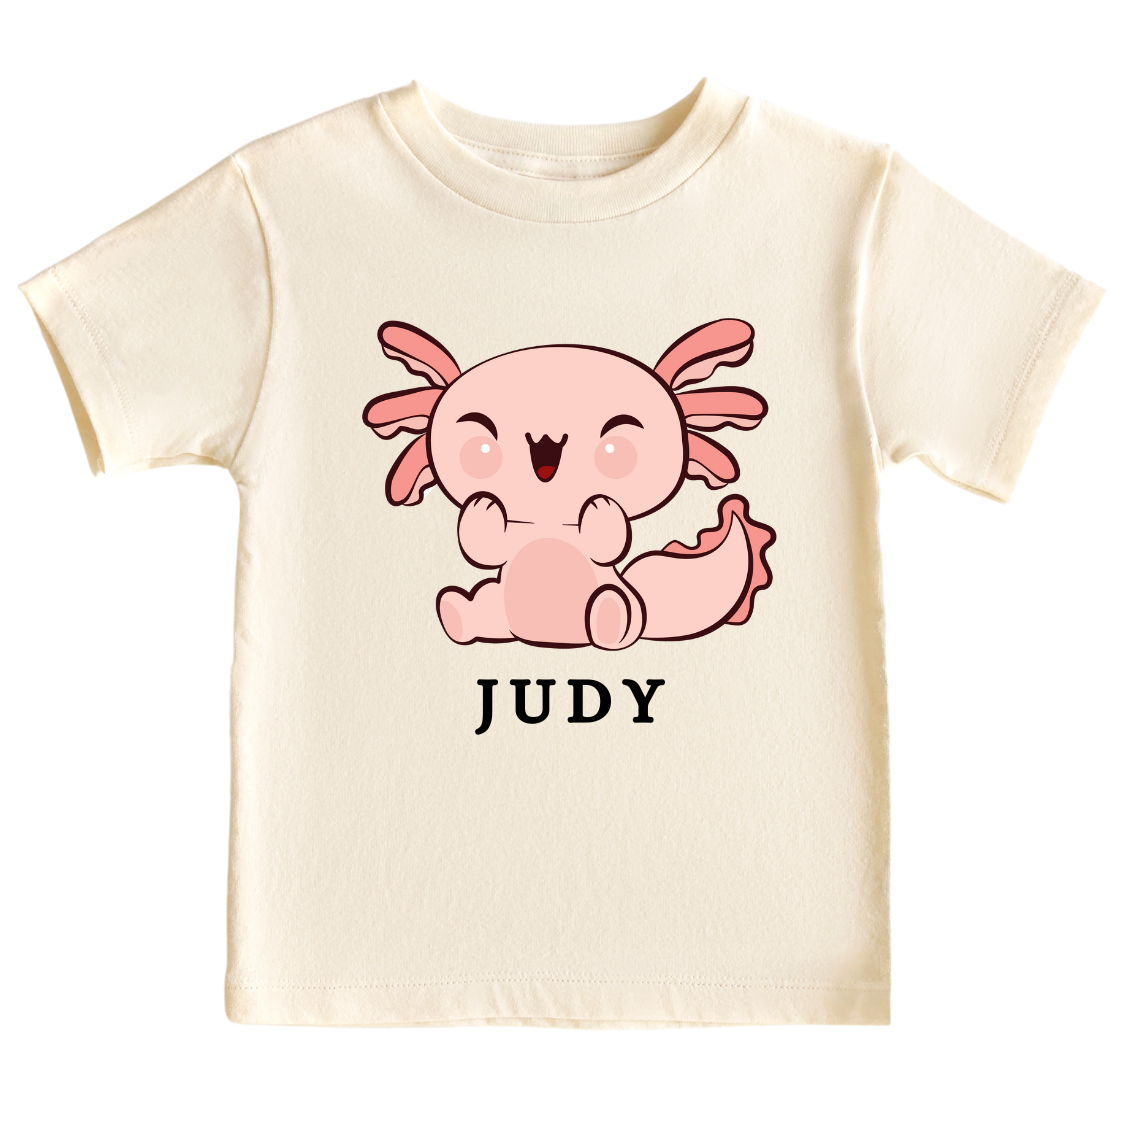 An adorable axolotl design on a kid's t-shirt and baby onesie, perfect for animal enthusiasts. The design can be personalized with customizable names, adding a touch of charm and creating lovable moments with your little one.